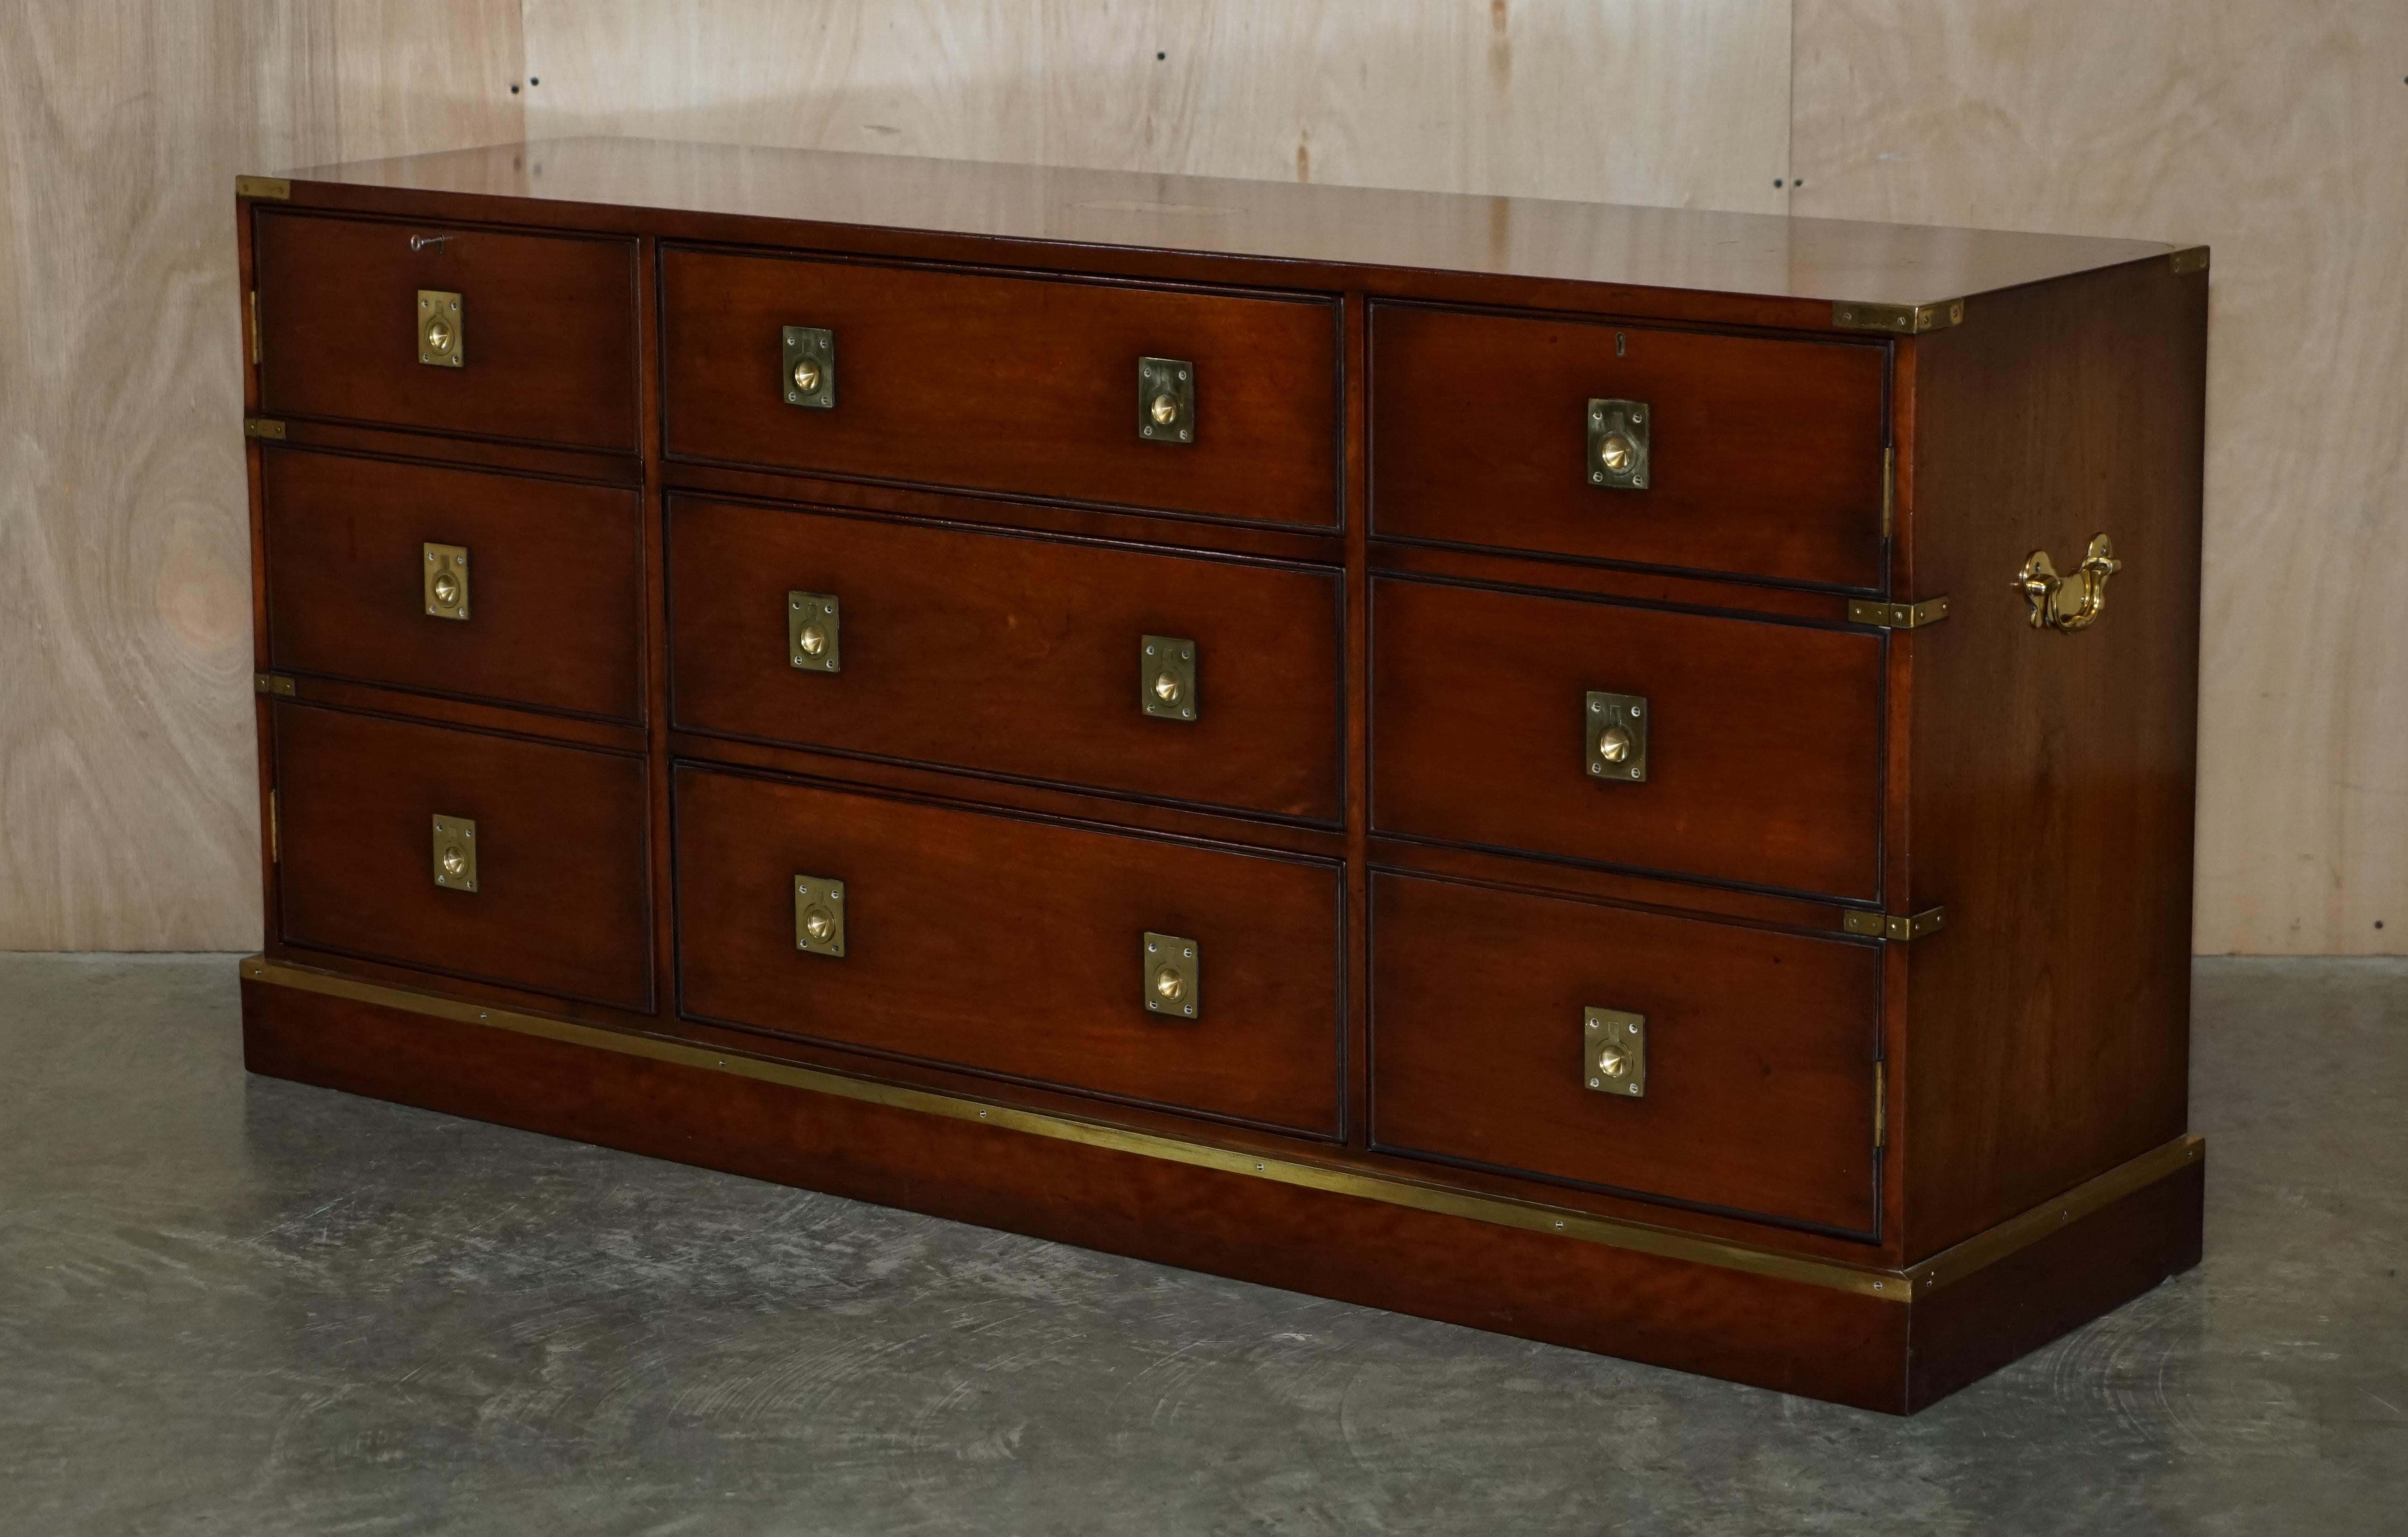 We are delighted to offer for sale this lovely vintage solid mahogany with brass trim Military Campaign sideboard with three drawers and two cupboards made by REH Kennedy and retailed through Harrods London

A very well made and decorative piece,